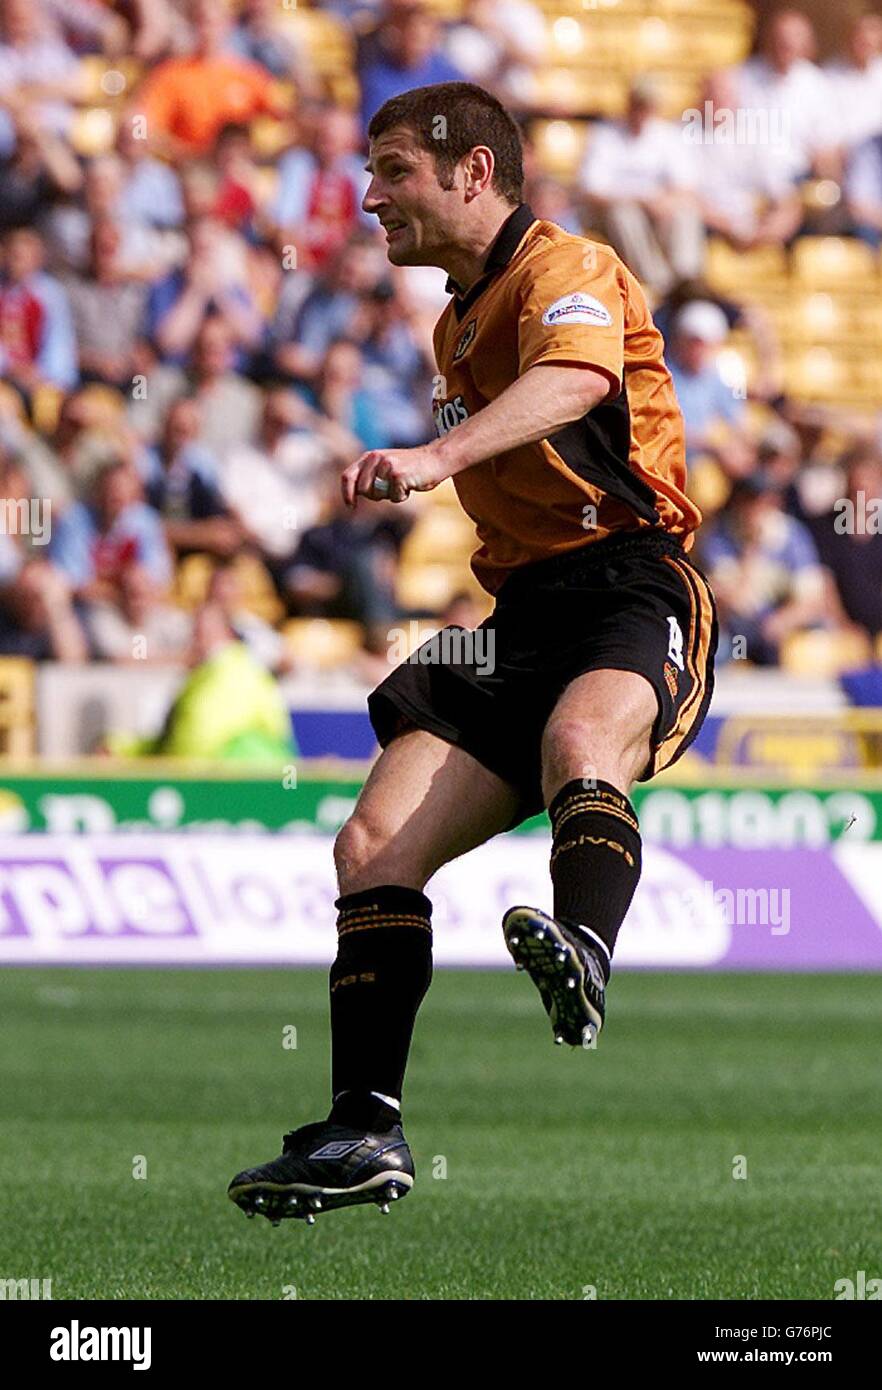 Wolverhampton Wanderers' Denis Irwin scores the 2nd Wolves goal from a free kick, against Burnley, during their Nationwide Division One match at Wolves' Molineux ground in Wolverhampton. . Stock Photo